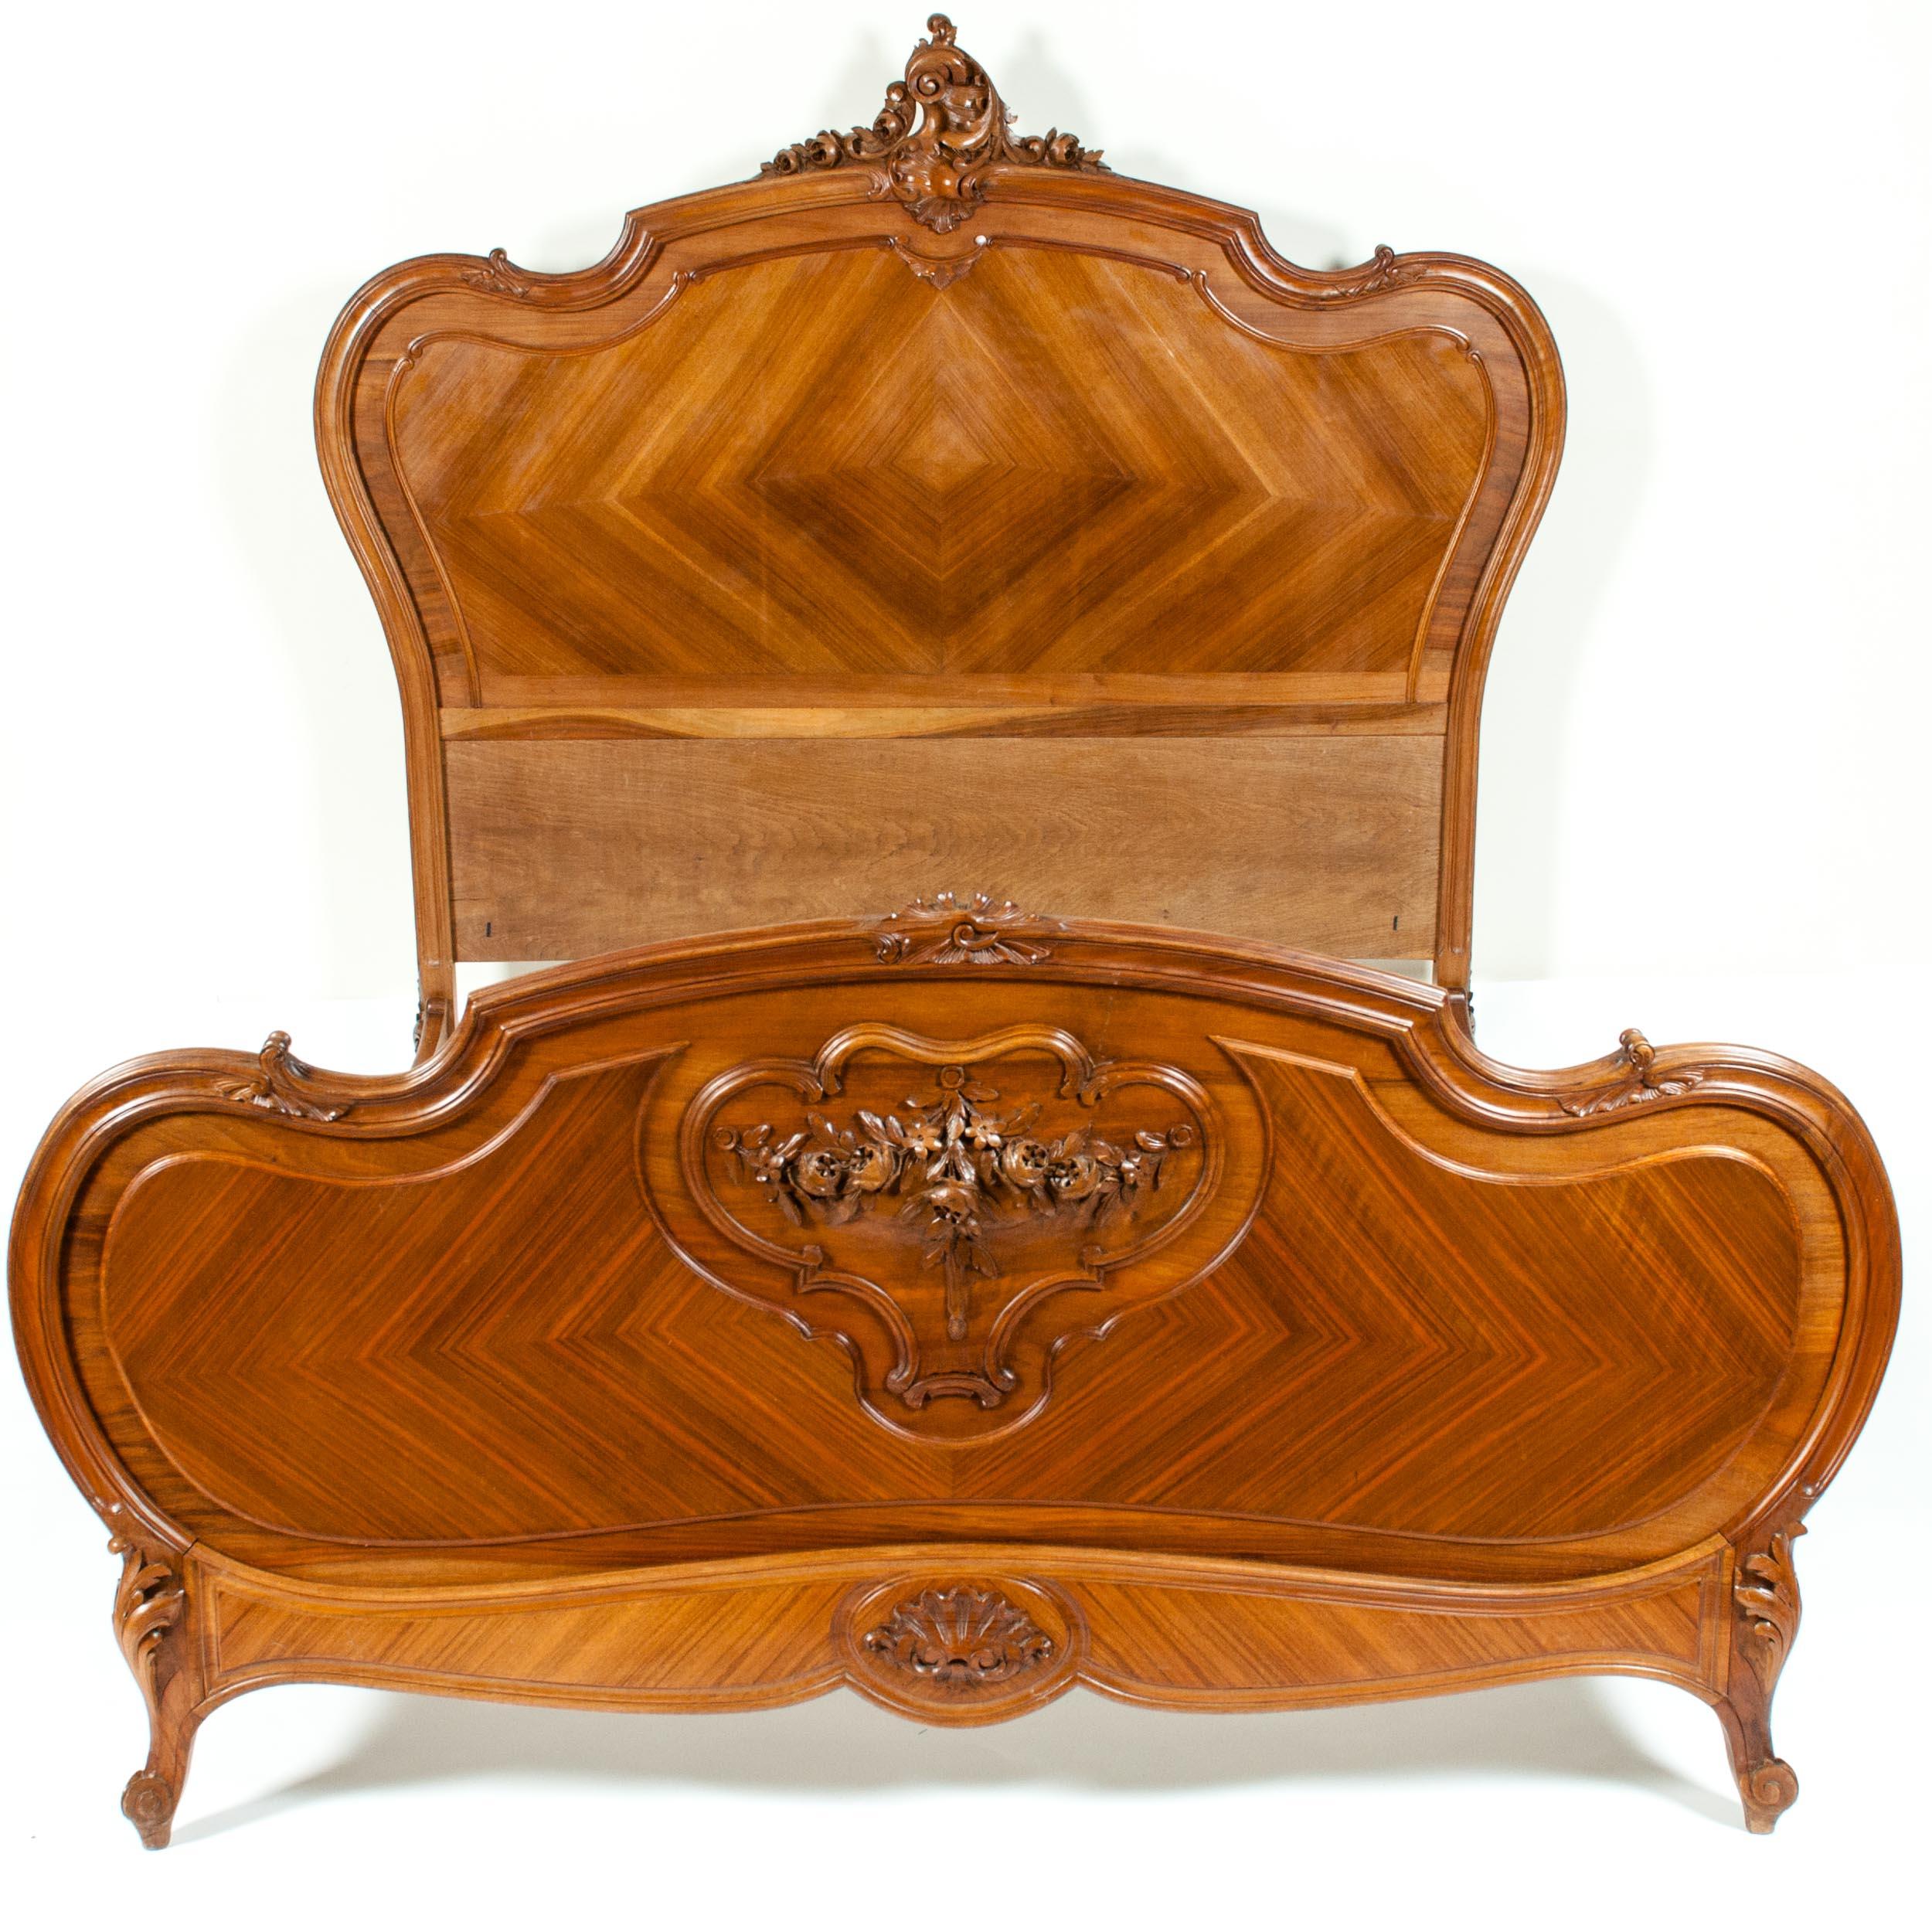 Late 19th Century French Burl Walnut Bed 9